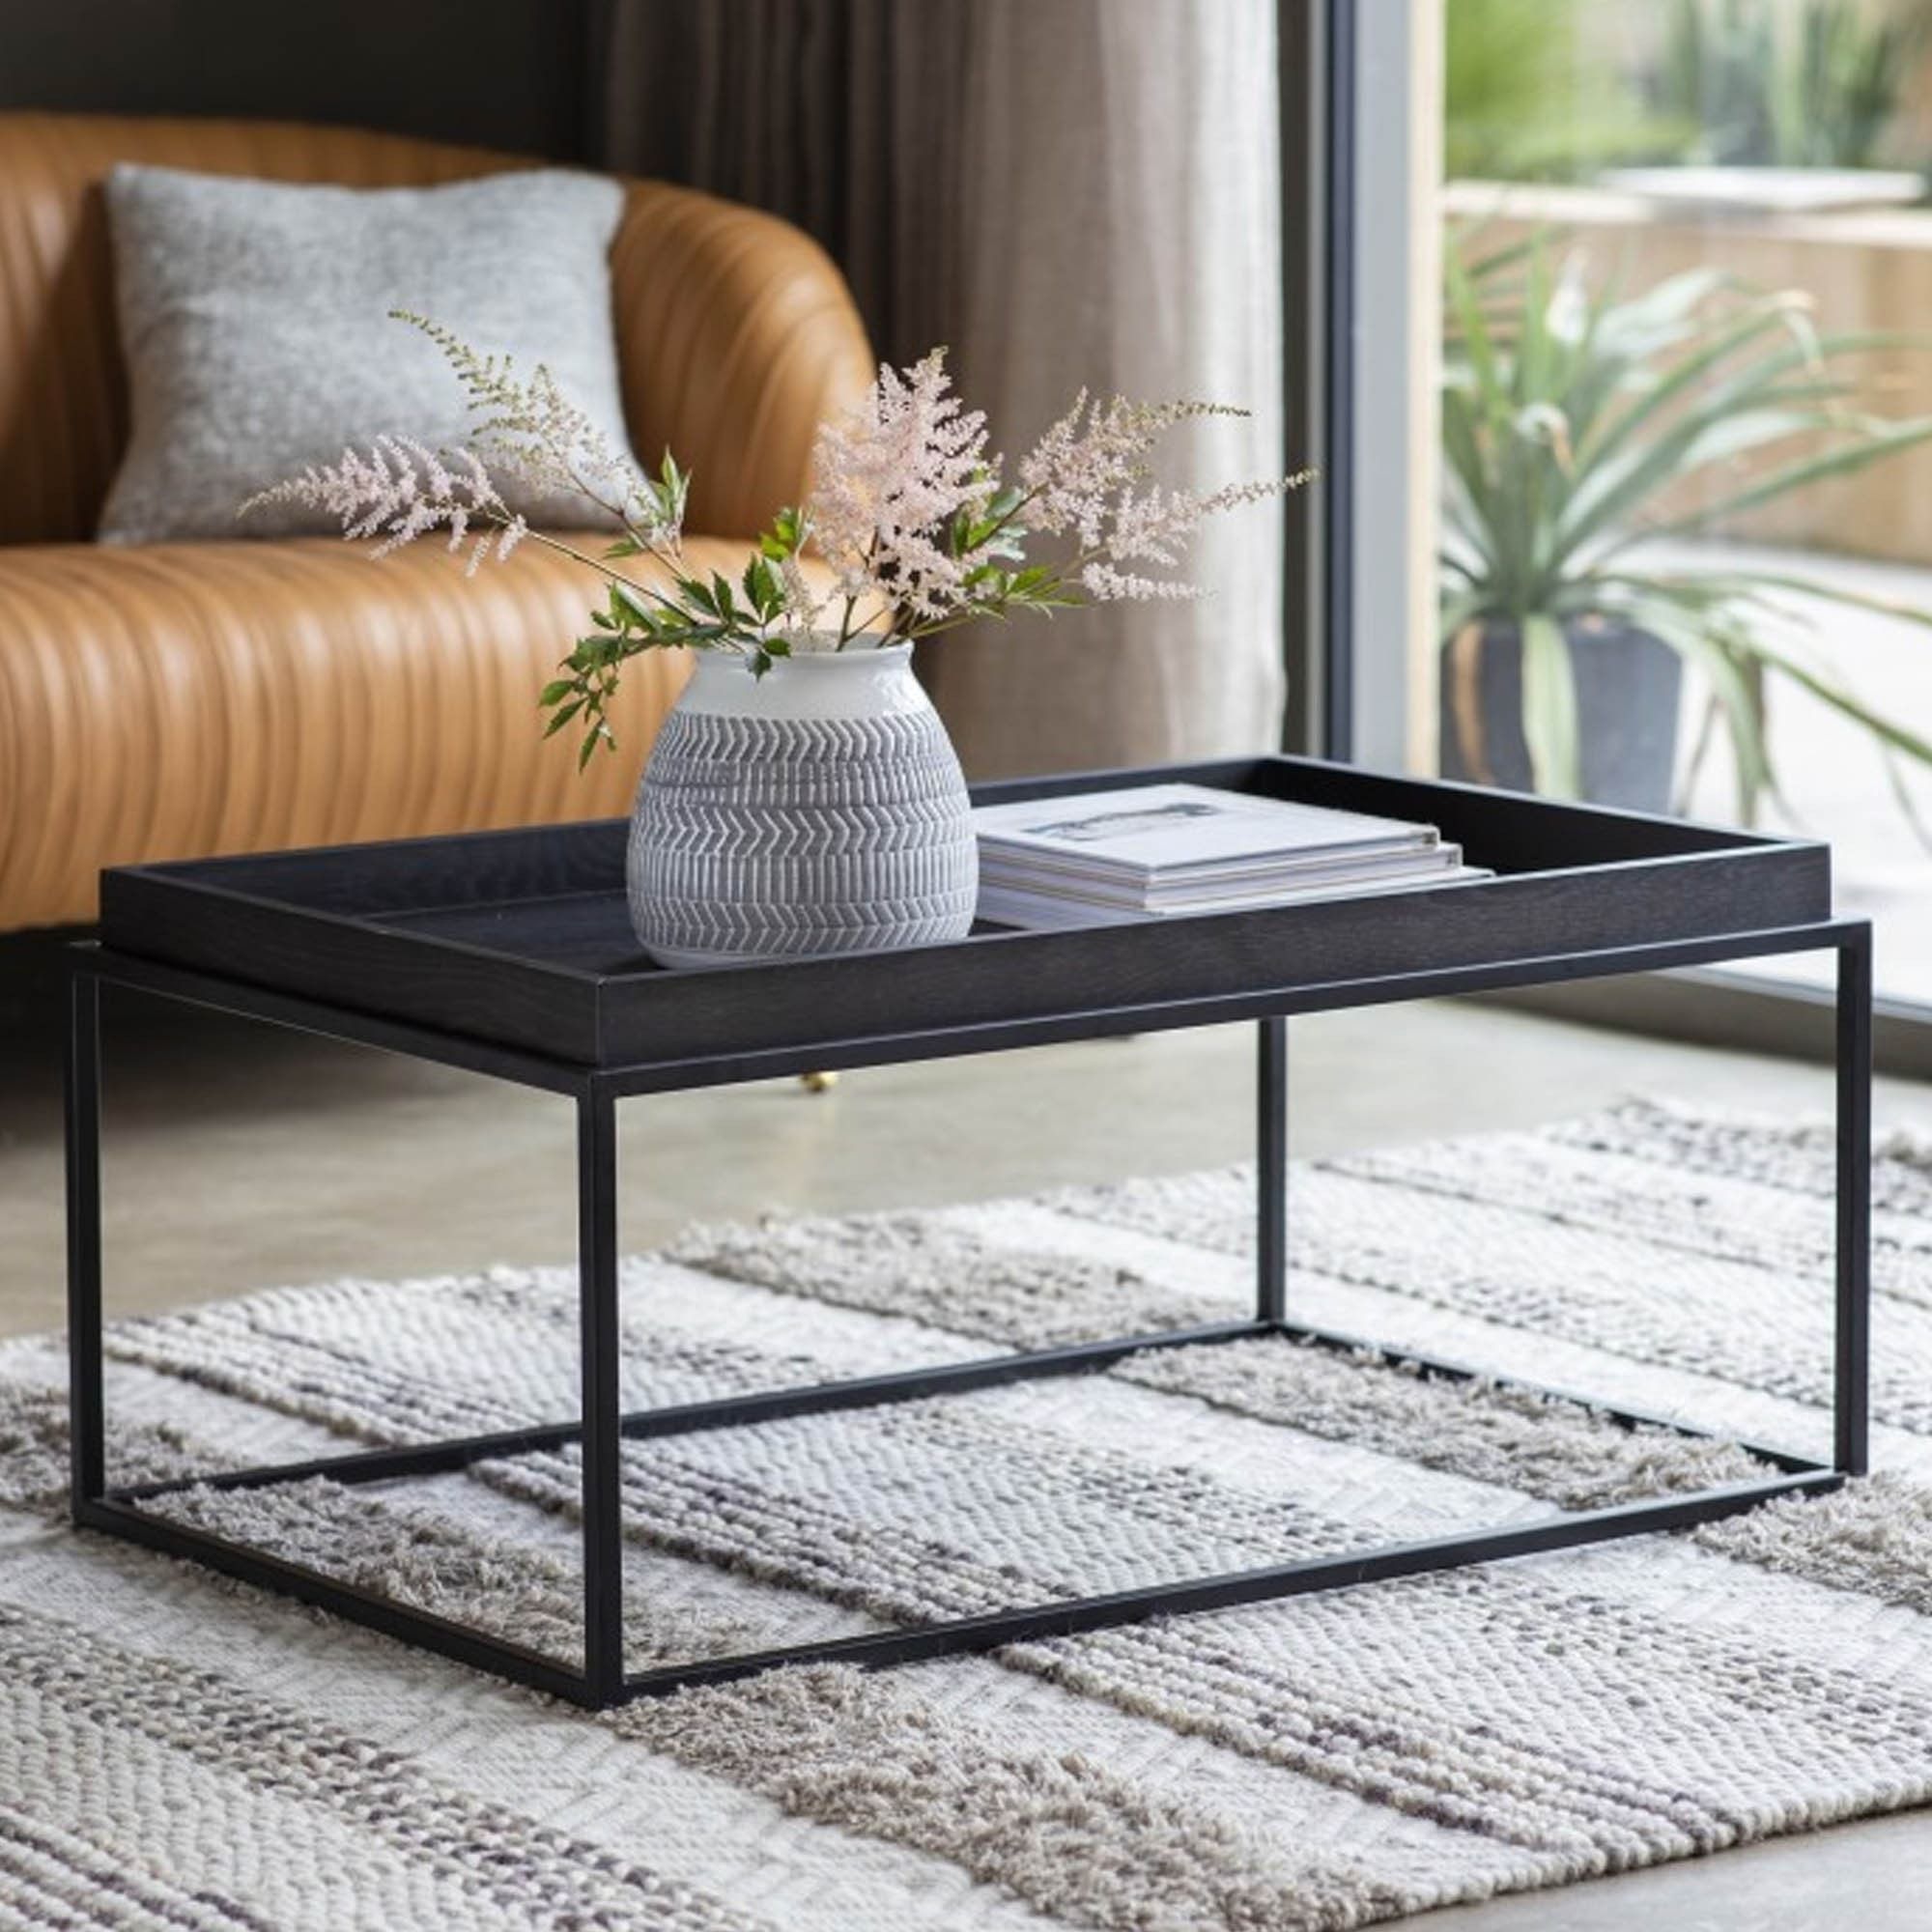 Forden Tray Coffee Table Black | Modern Coffee Table | Industrial Pertaining To Coffee Tables With Trays (Gallery 13 of 20)